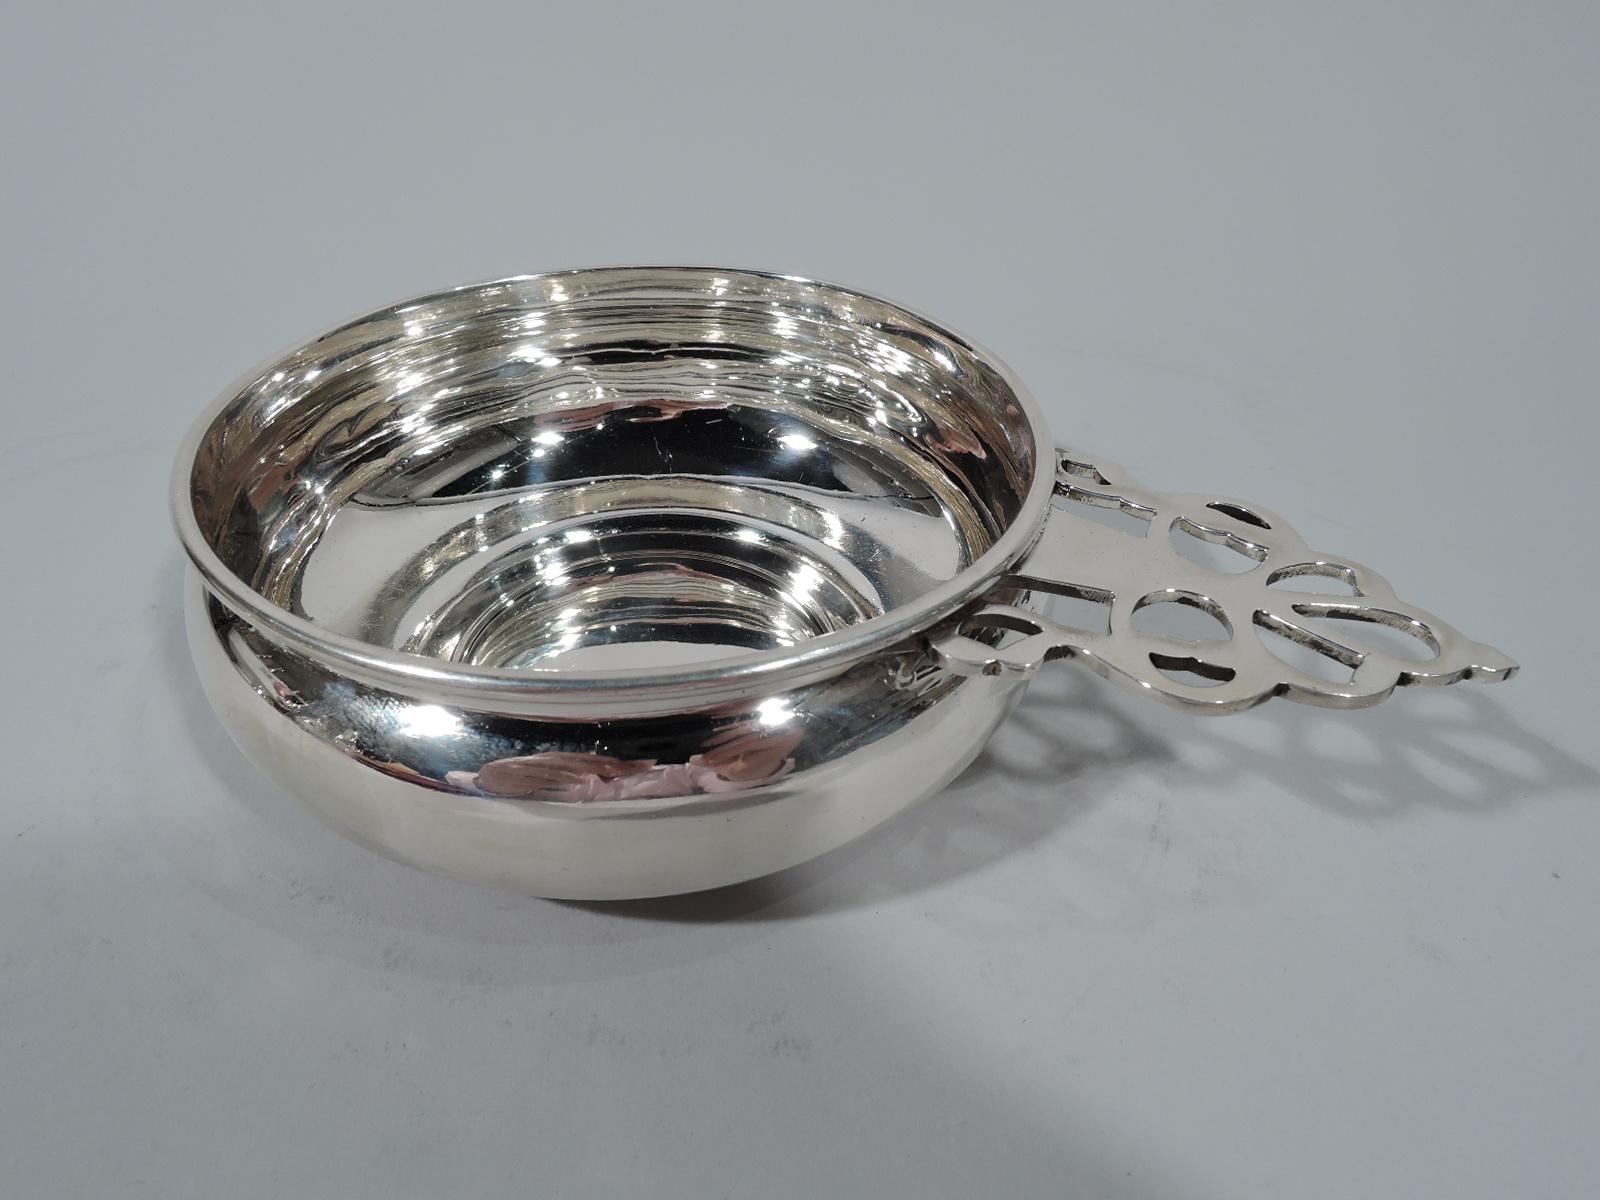 Traditional sterling silver porringer. Made by Gorham in Providence. Bellied bowl and open tree handle. Hallmark includes no. 242. Weight: 5.8 troy ounces.